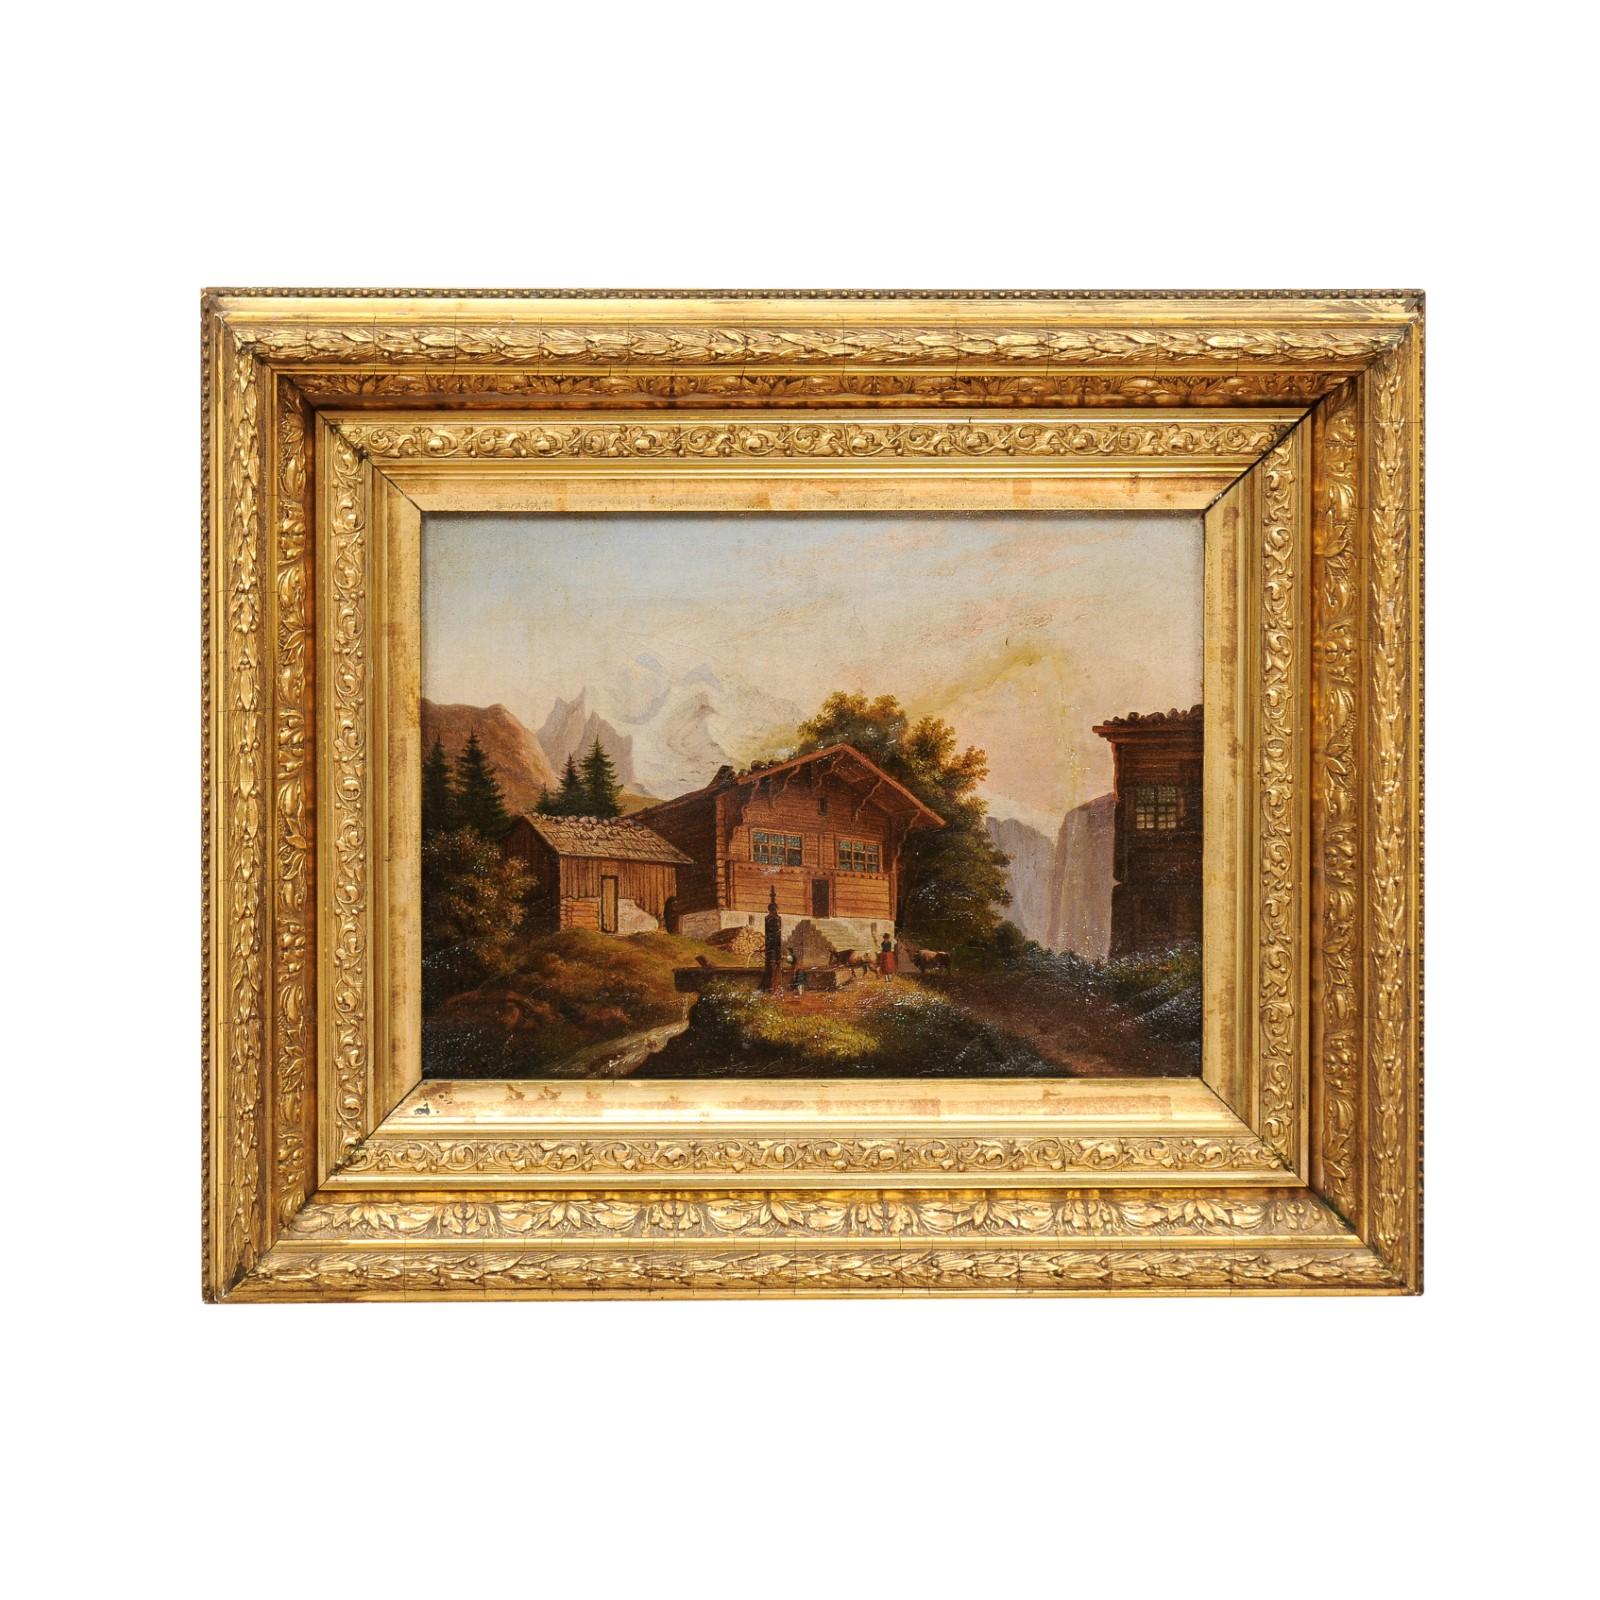  Giltwood Framed Oil on Canvas Painting of Chalet, 19th Century In Good Condition For Sale In Atlanta, GA